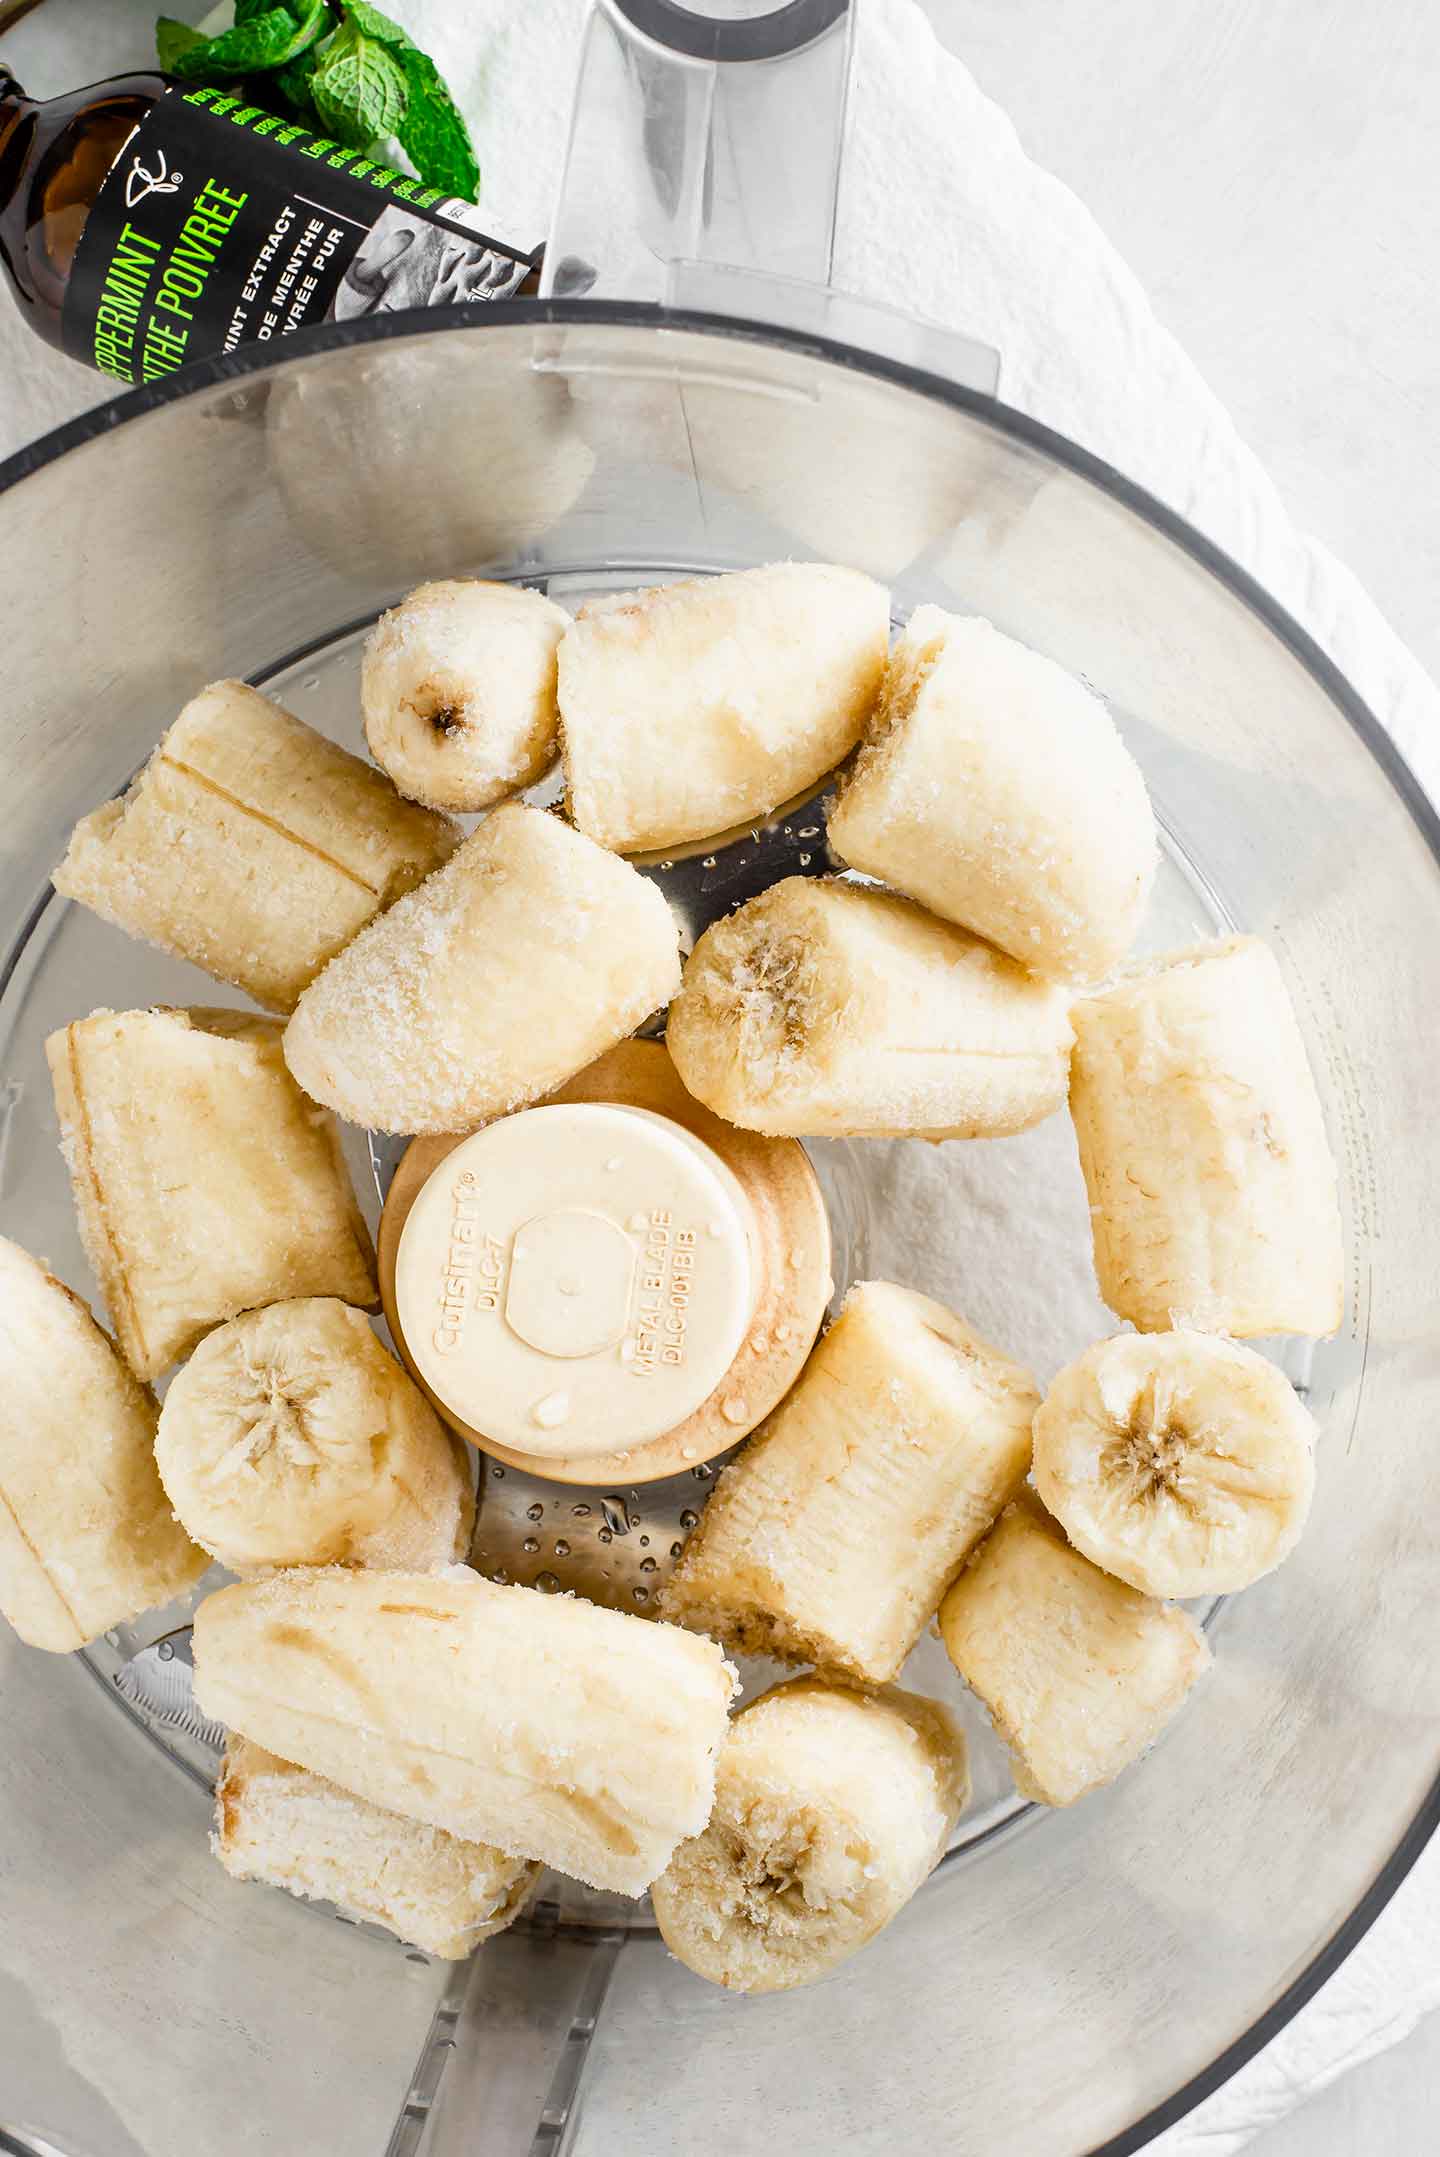 Top down view of frozen banana chunks in a food processor. A jar of pure peppermint extract rests on a tray.